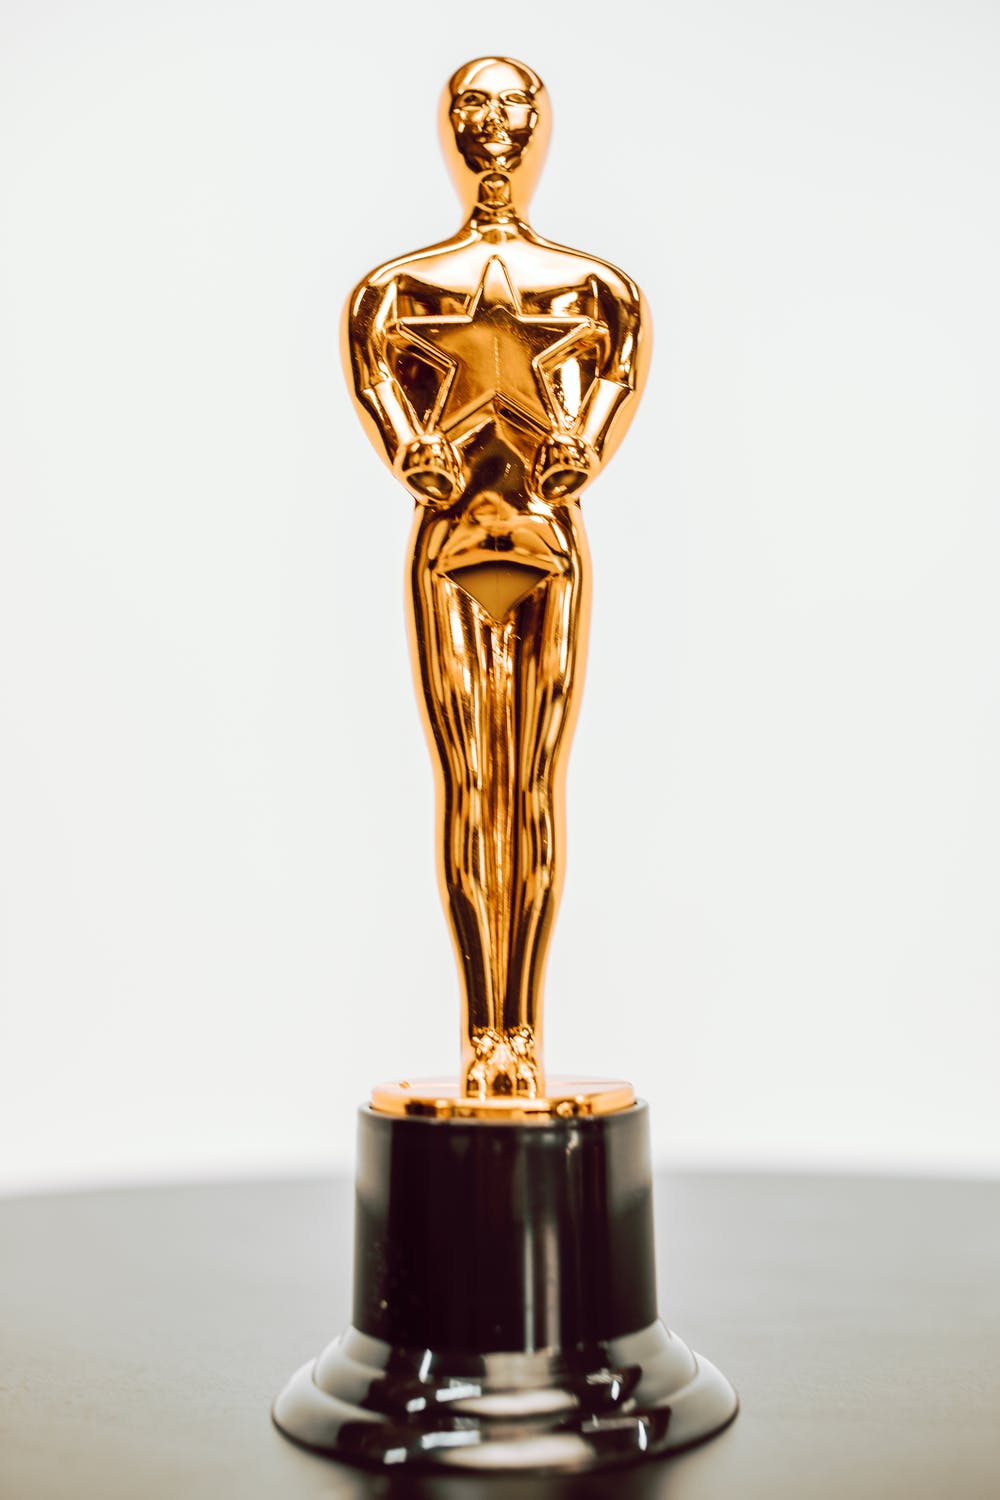 George gave his Man of the Year Award to Mrs. Farlow | Source: Pexels